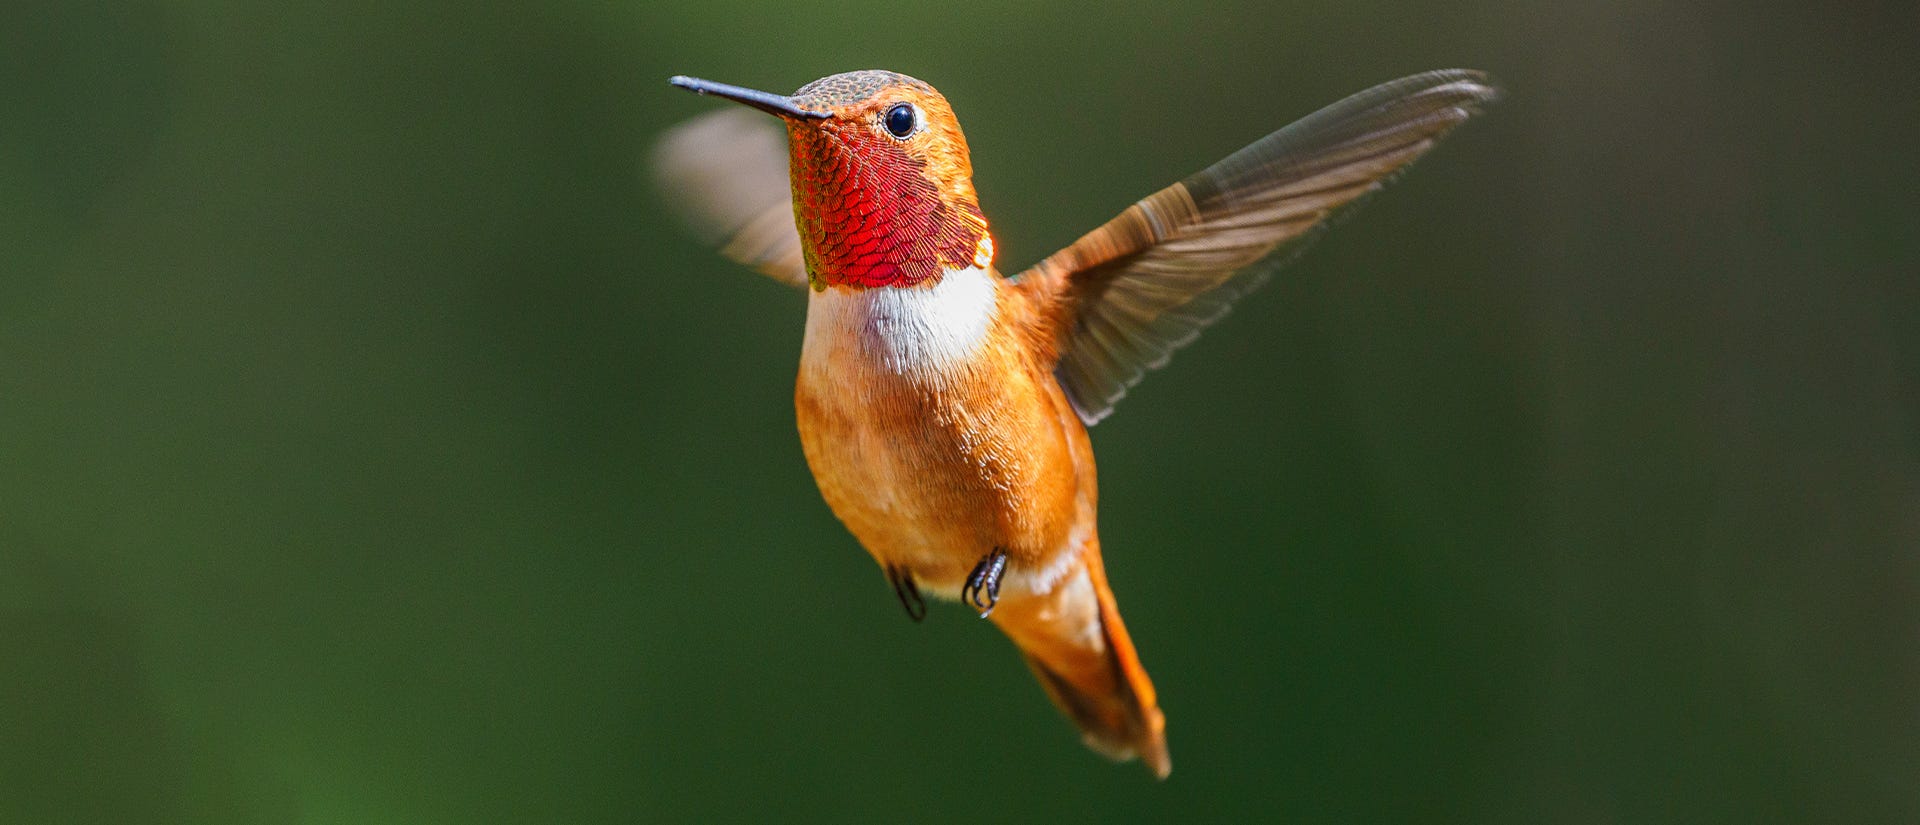 12 Amazing Hummingbird Migration Facts; rufous hummingbird flying on a green background